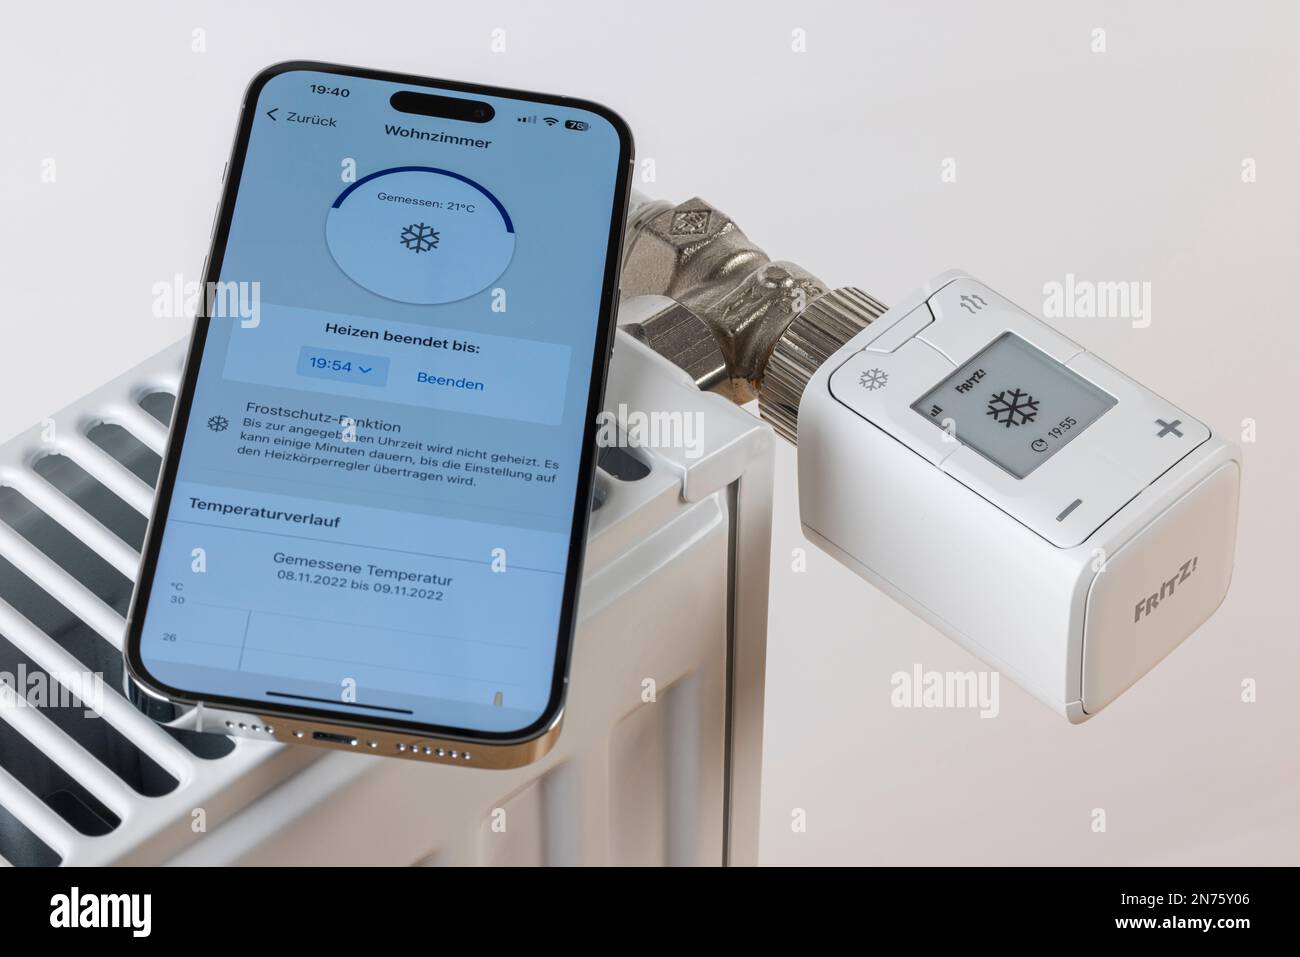 Apple iPhone, display, FRITZ! Smart Home app, radiator, WLAN radiator  thermostat FRITZ! DECT 302, display shows snowflakes icon, frost protection  approx ö°C., white background, icon image, smartphone for heating control,  smart home